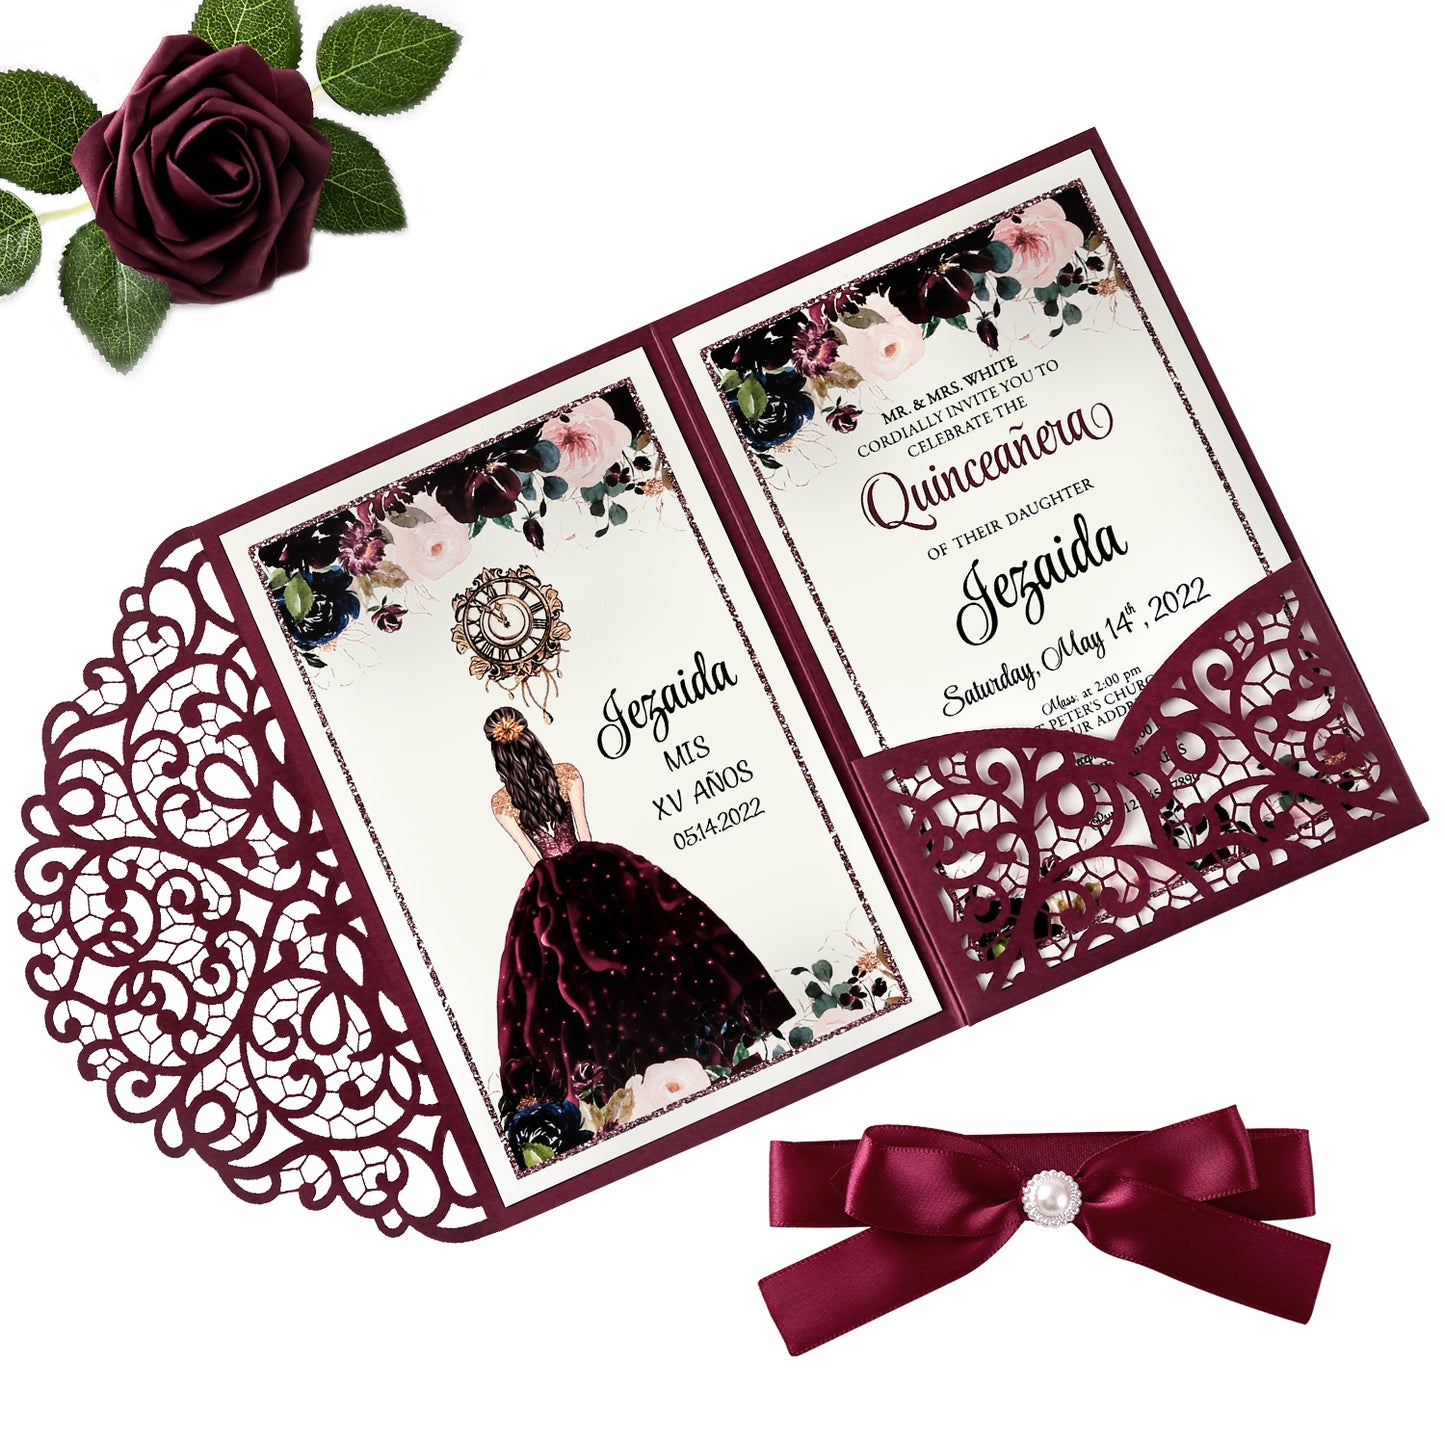 4.7 x7 inch Burgundy Laser Cut Hollow Rose Quinceanera Invitations Cards with Envelopes for Quinceanera Party